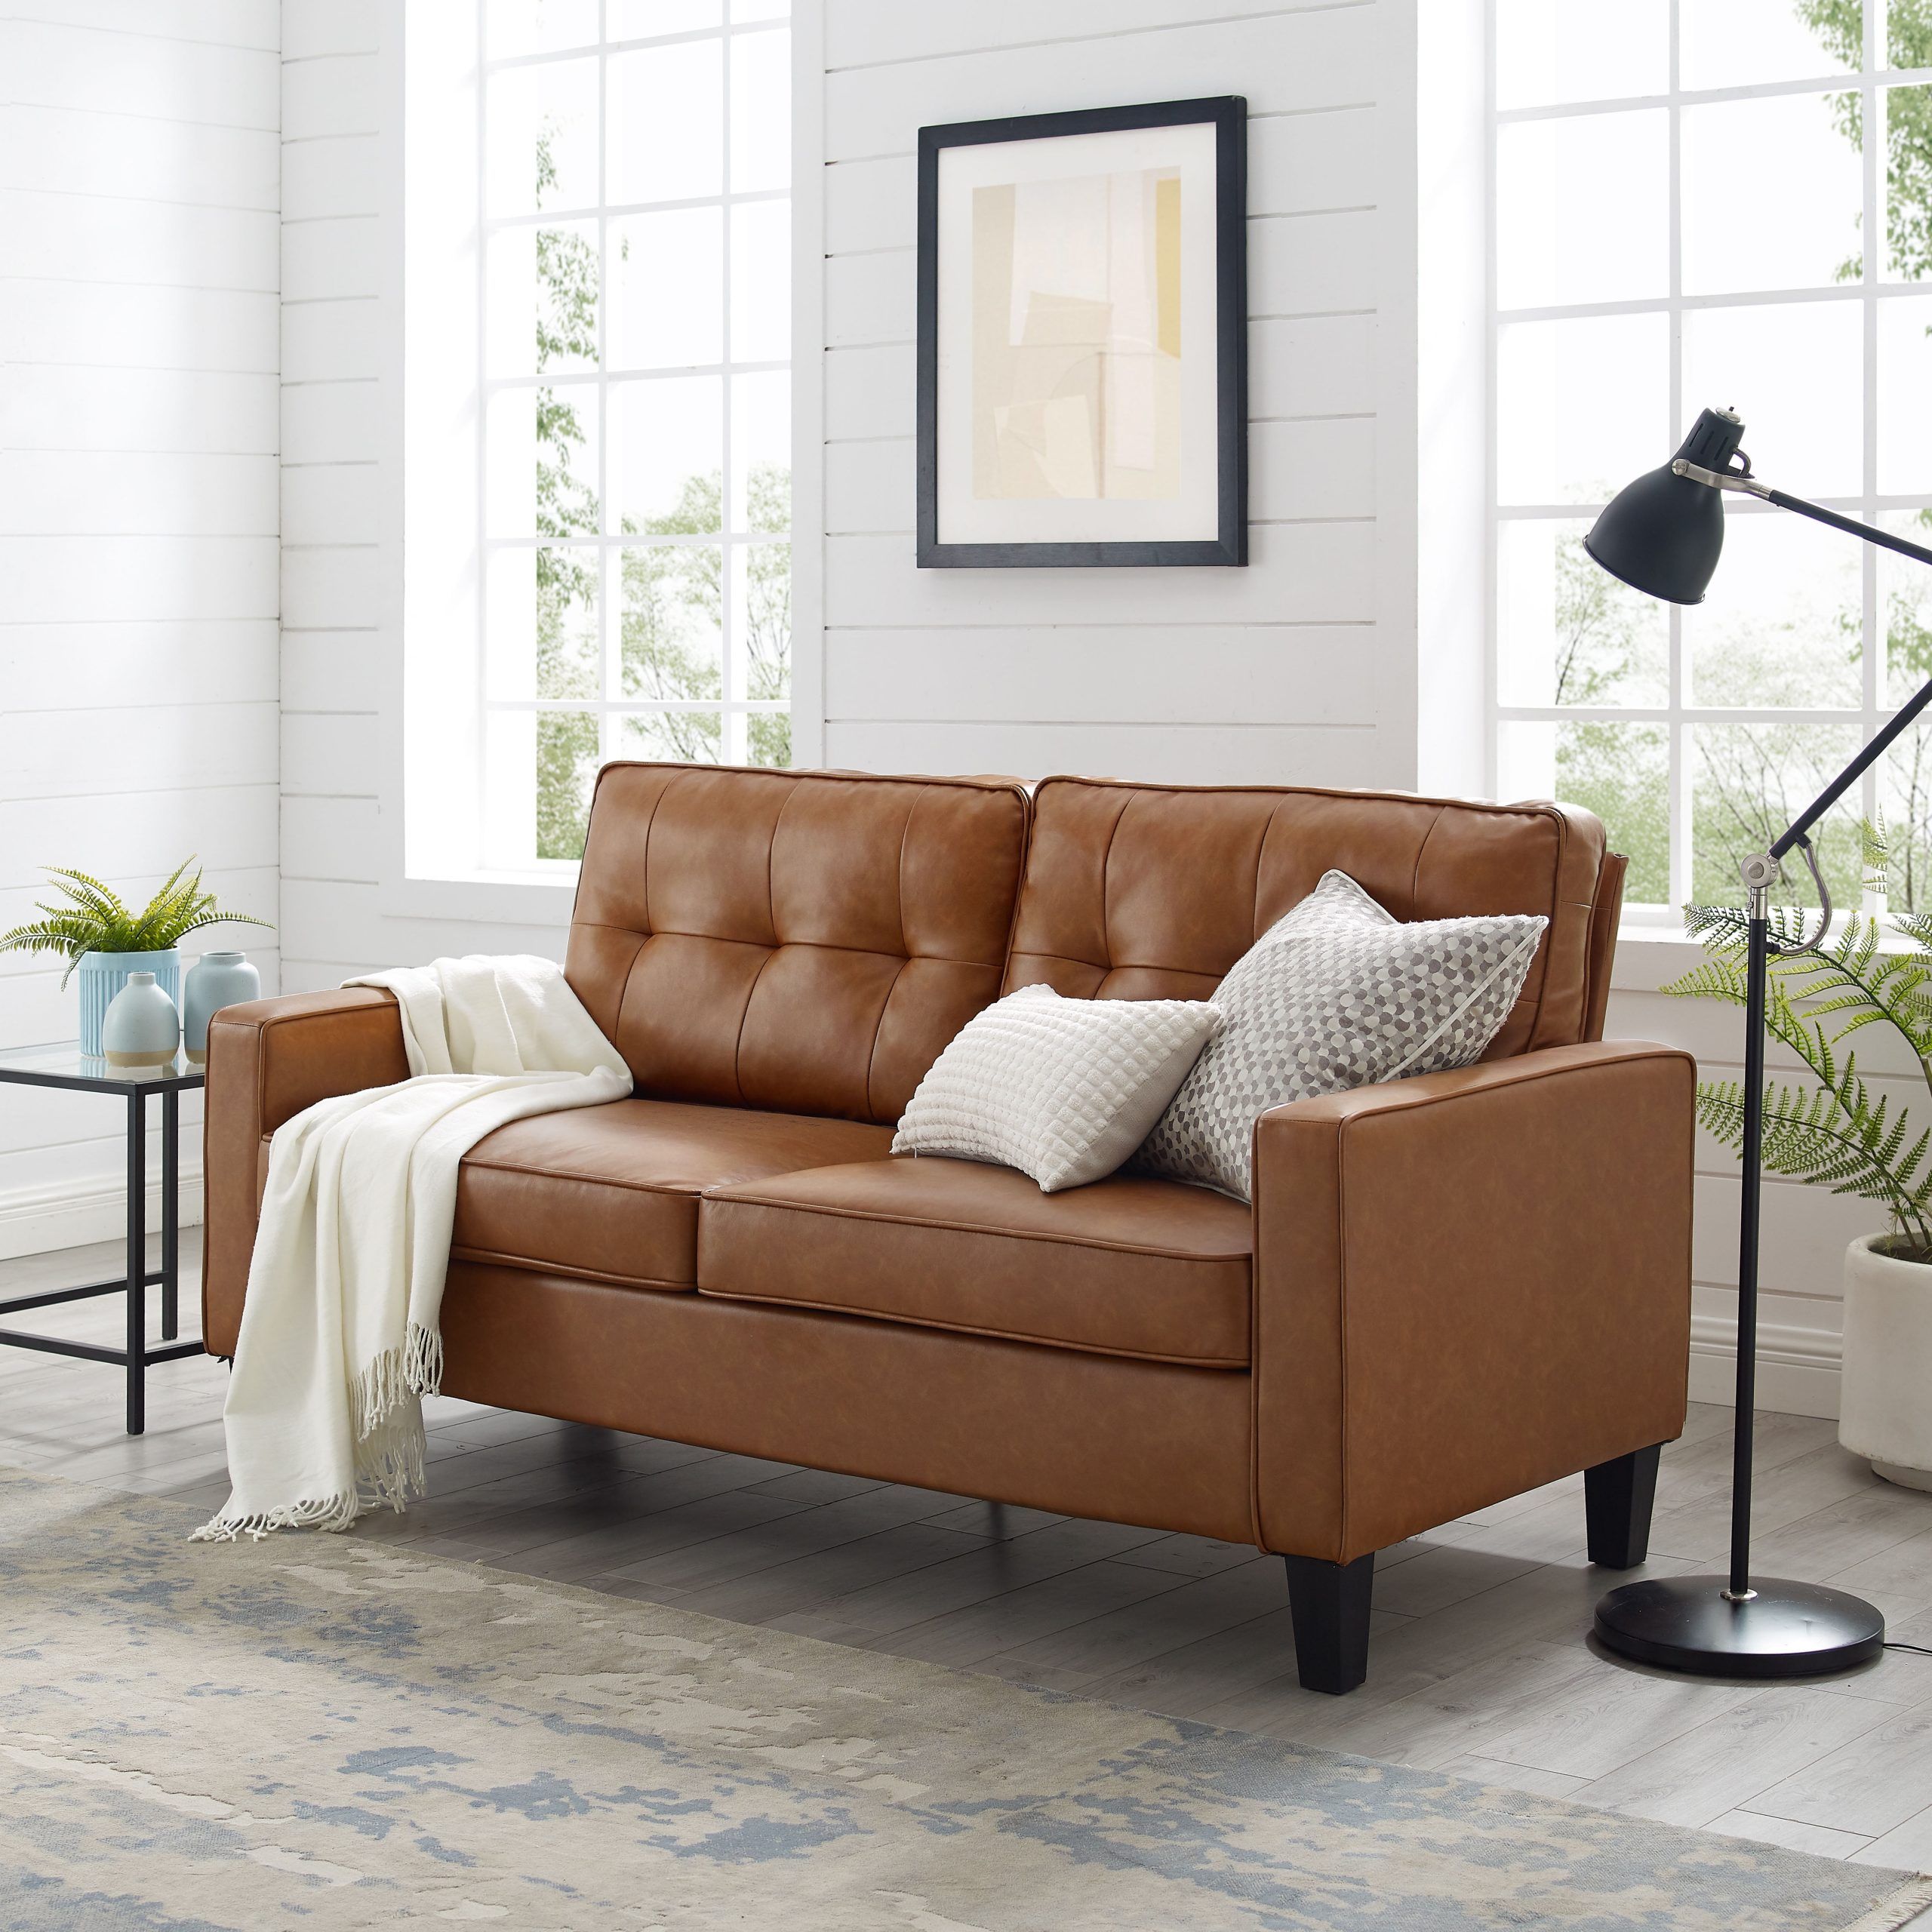 Faux Leather Sofas In Dark Brown Inside Trendy Mainstays Faux Leather Apartment Sofa Brown – Walmart (View 2 of 15)